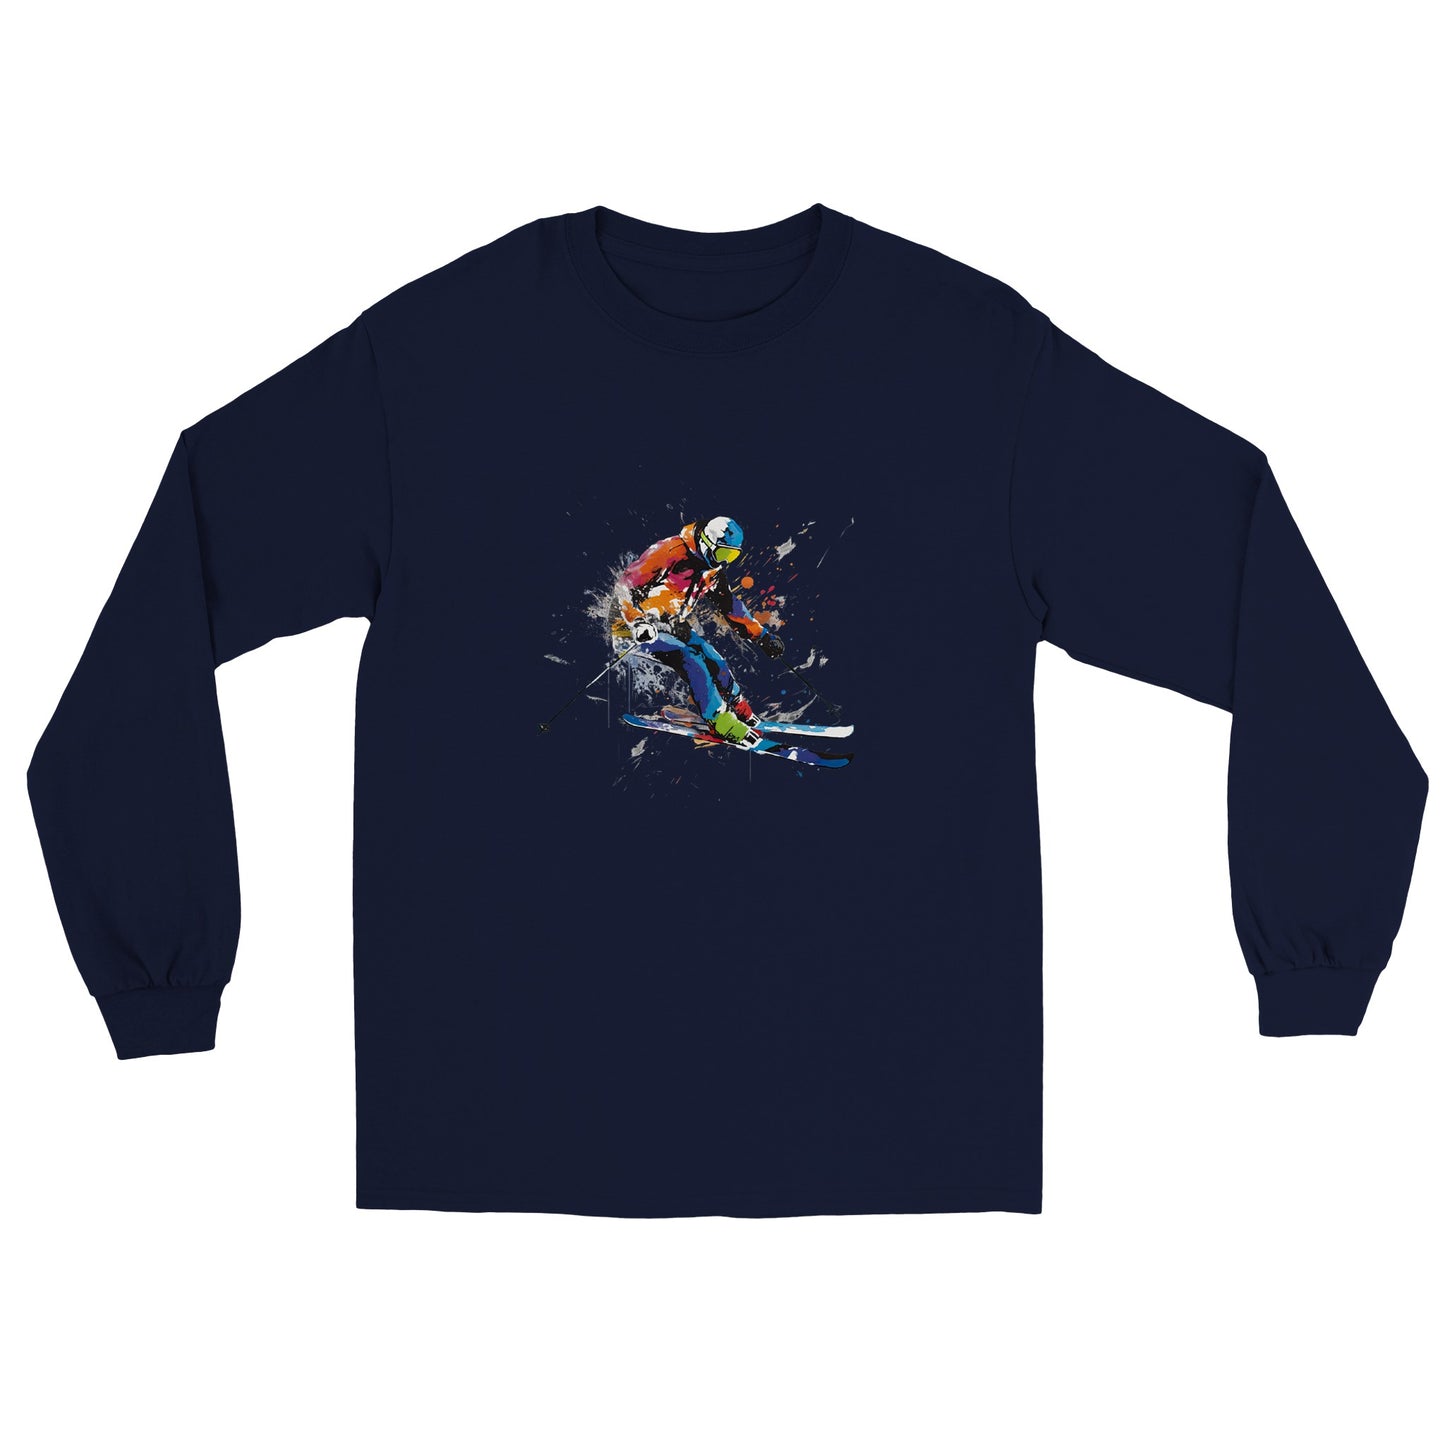 Navy blue long sleeve t-shirt with a skier print